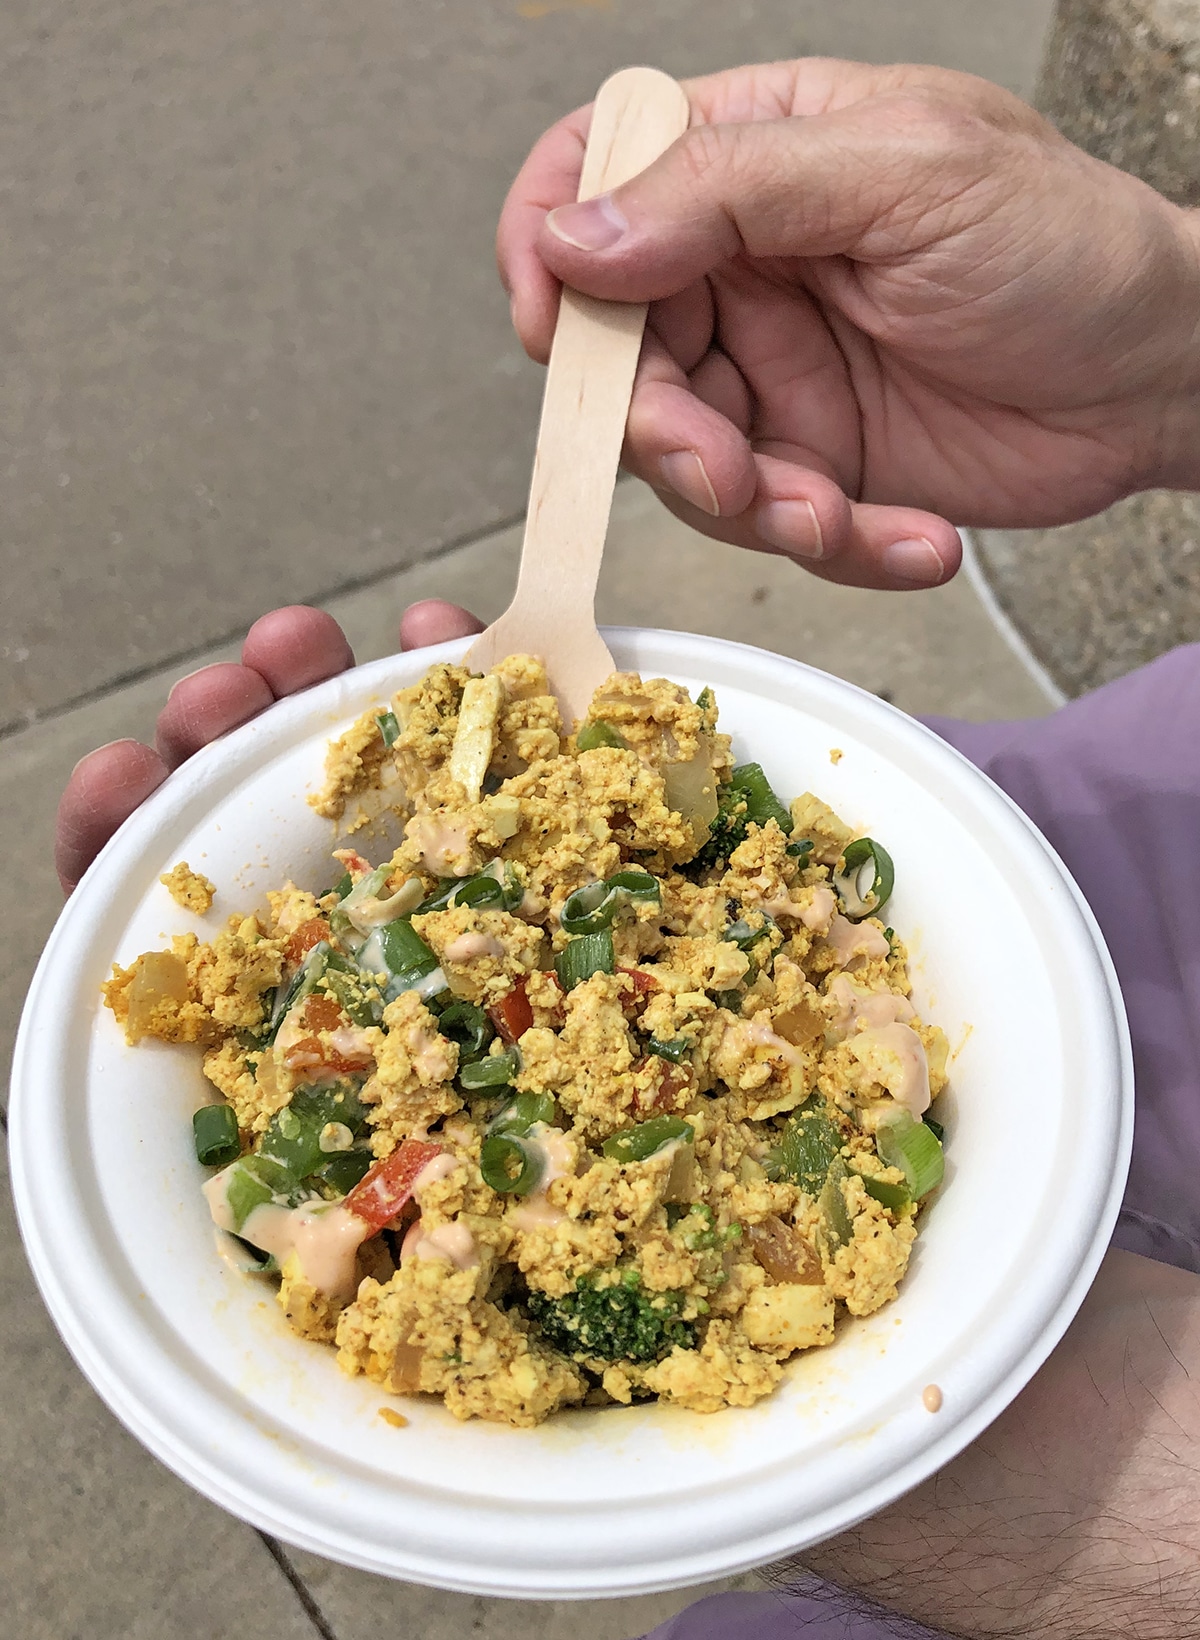 Hand holding spoon in a bowl of tofu scramble.